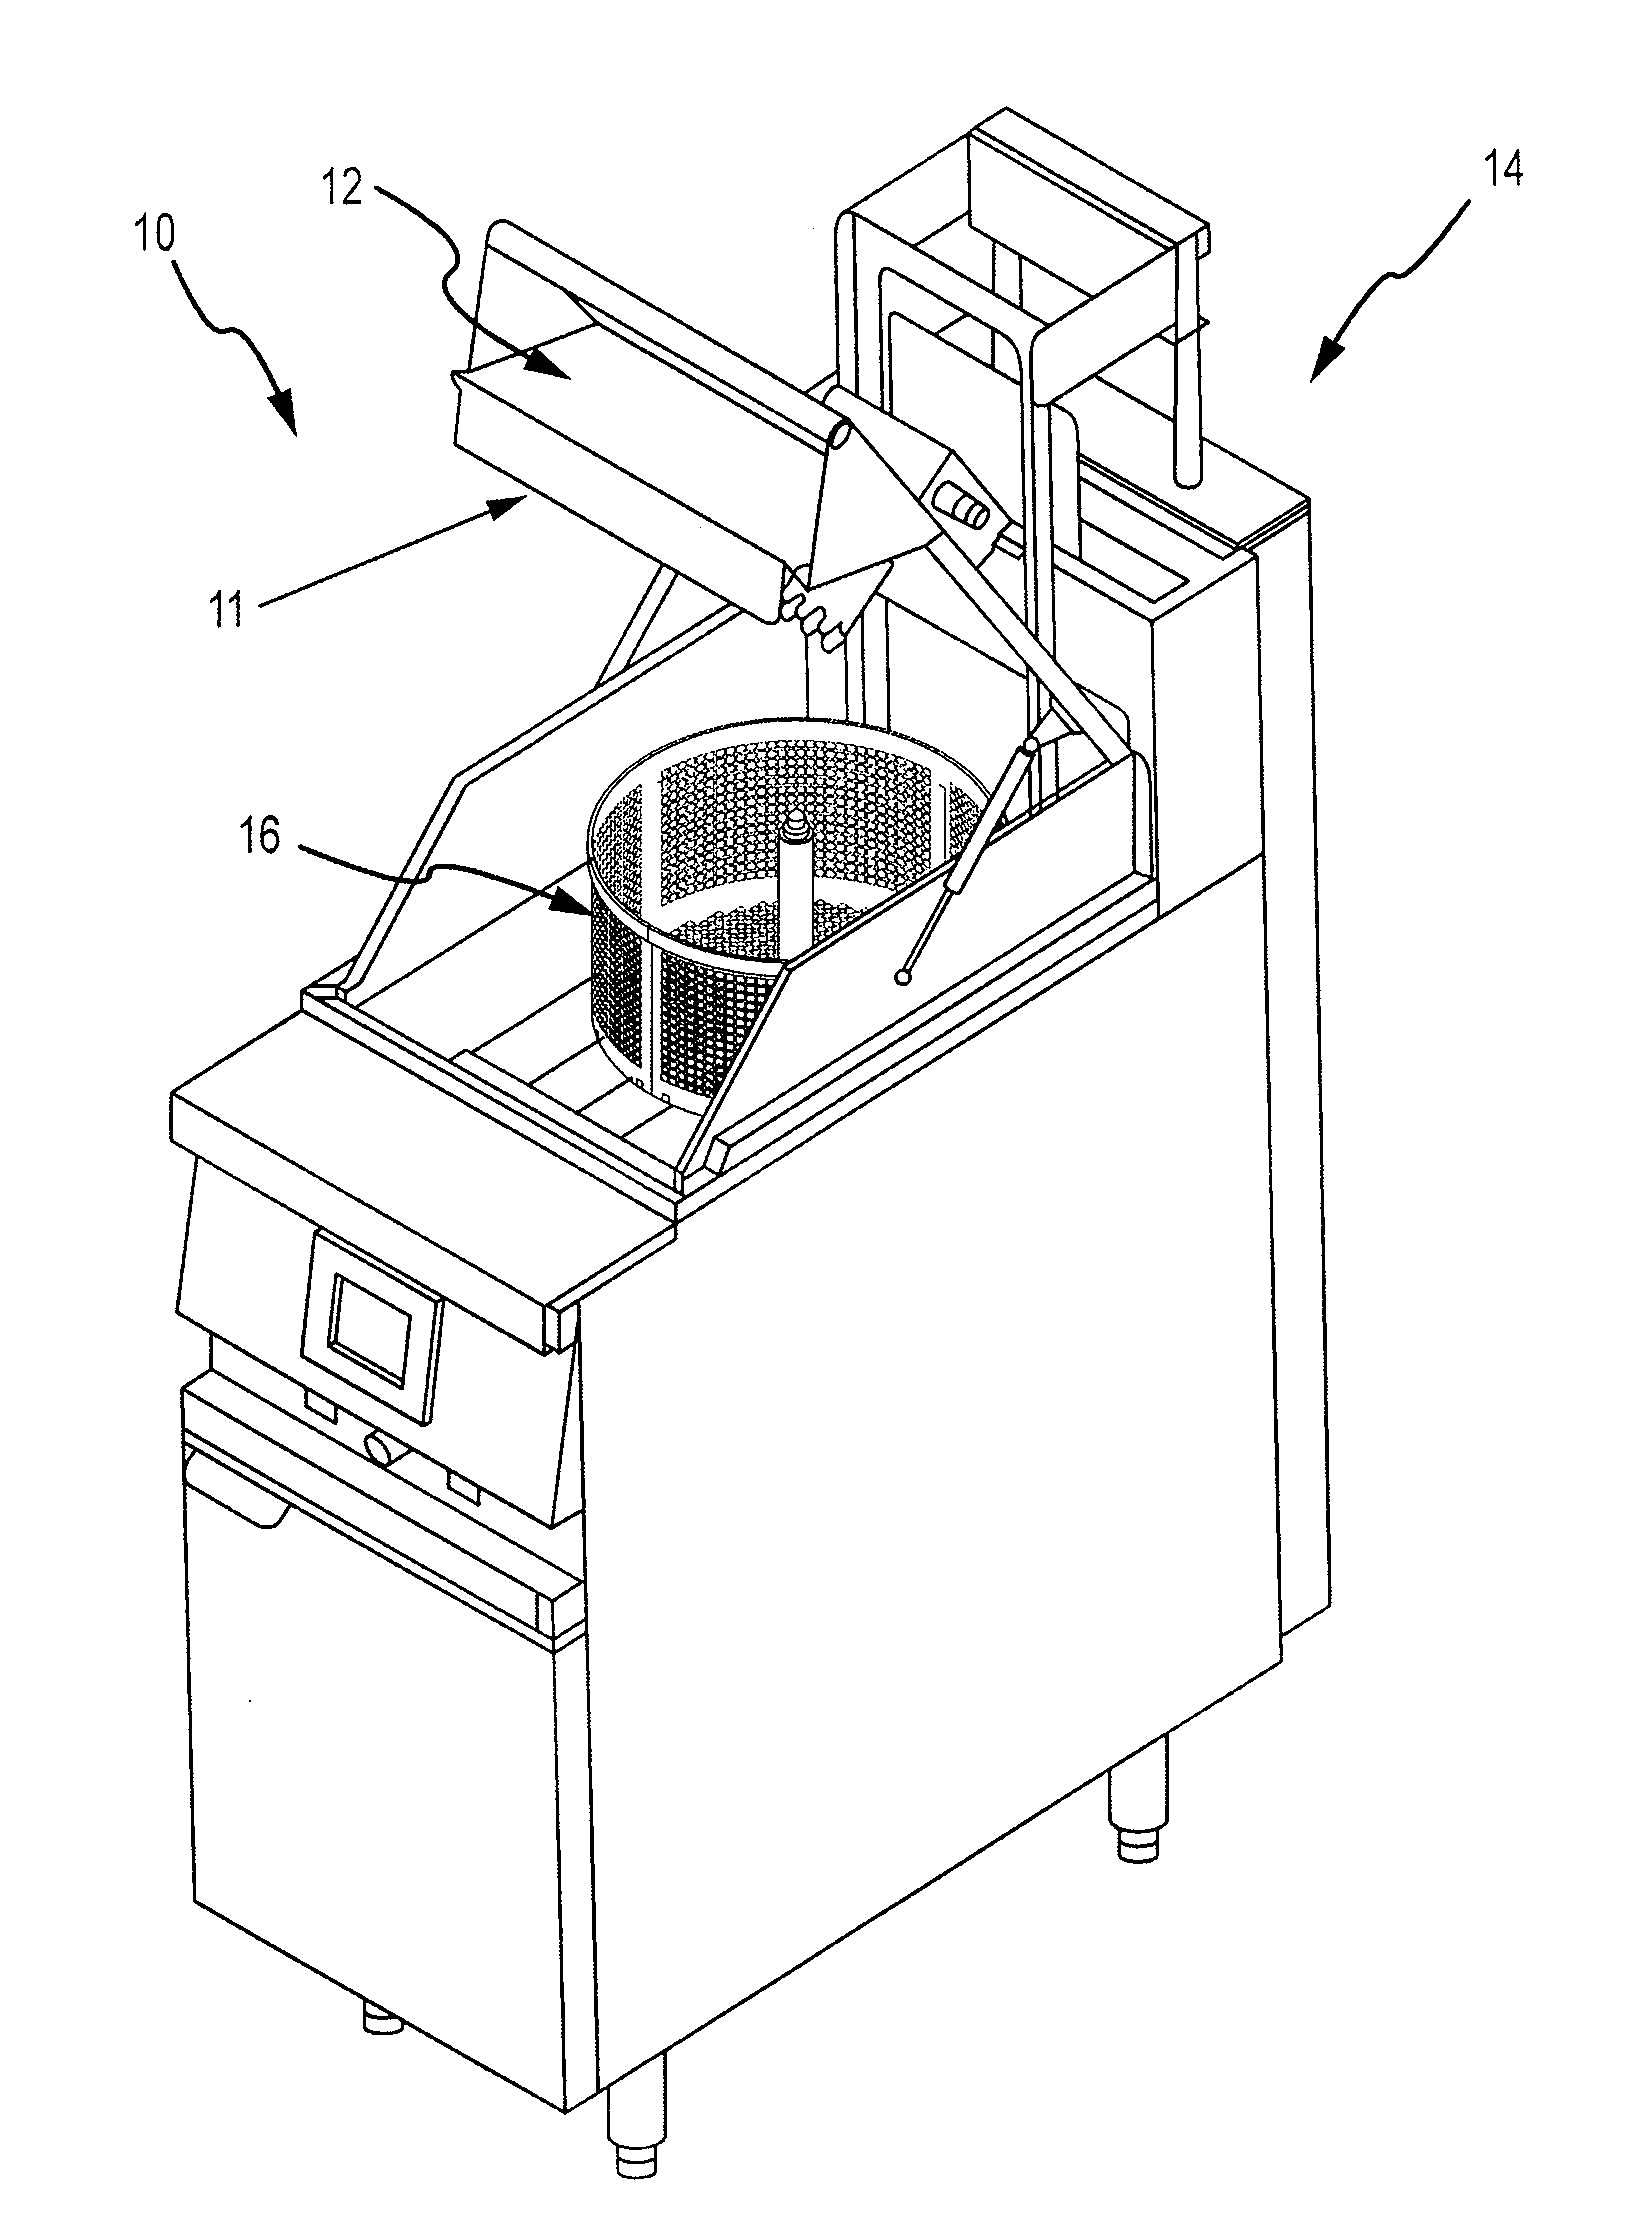 Methods and apparatus for vibration damping in a cooking device